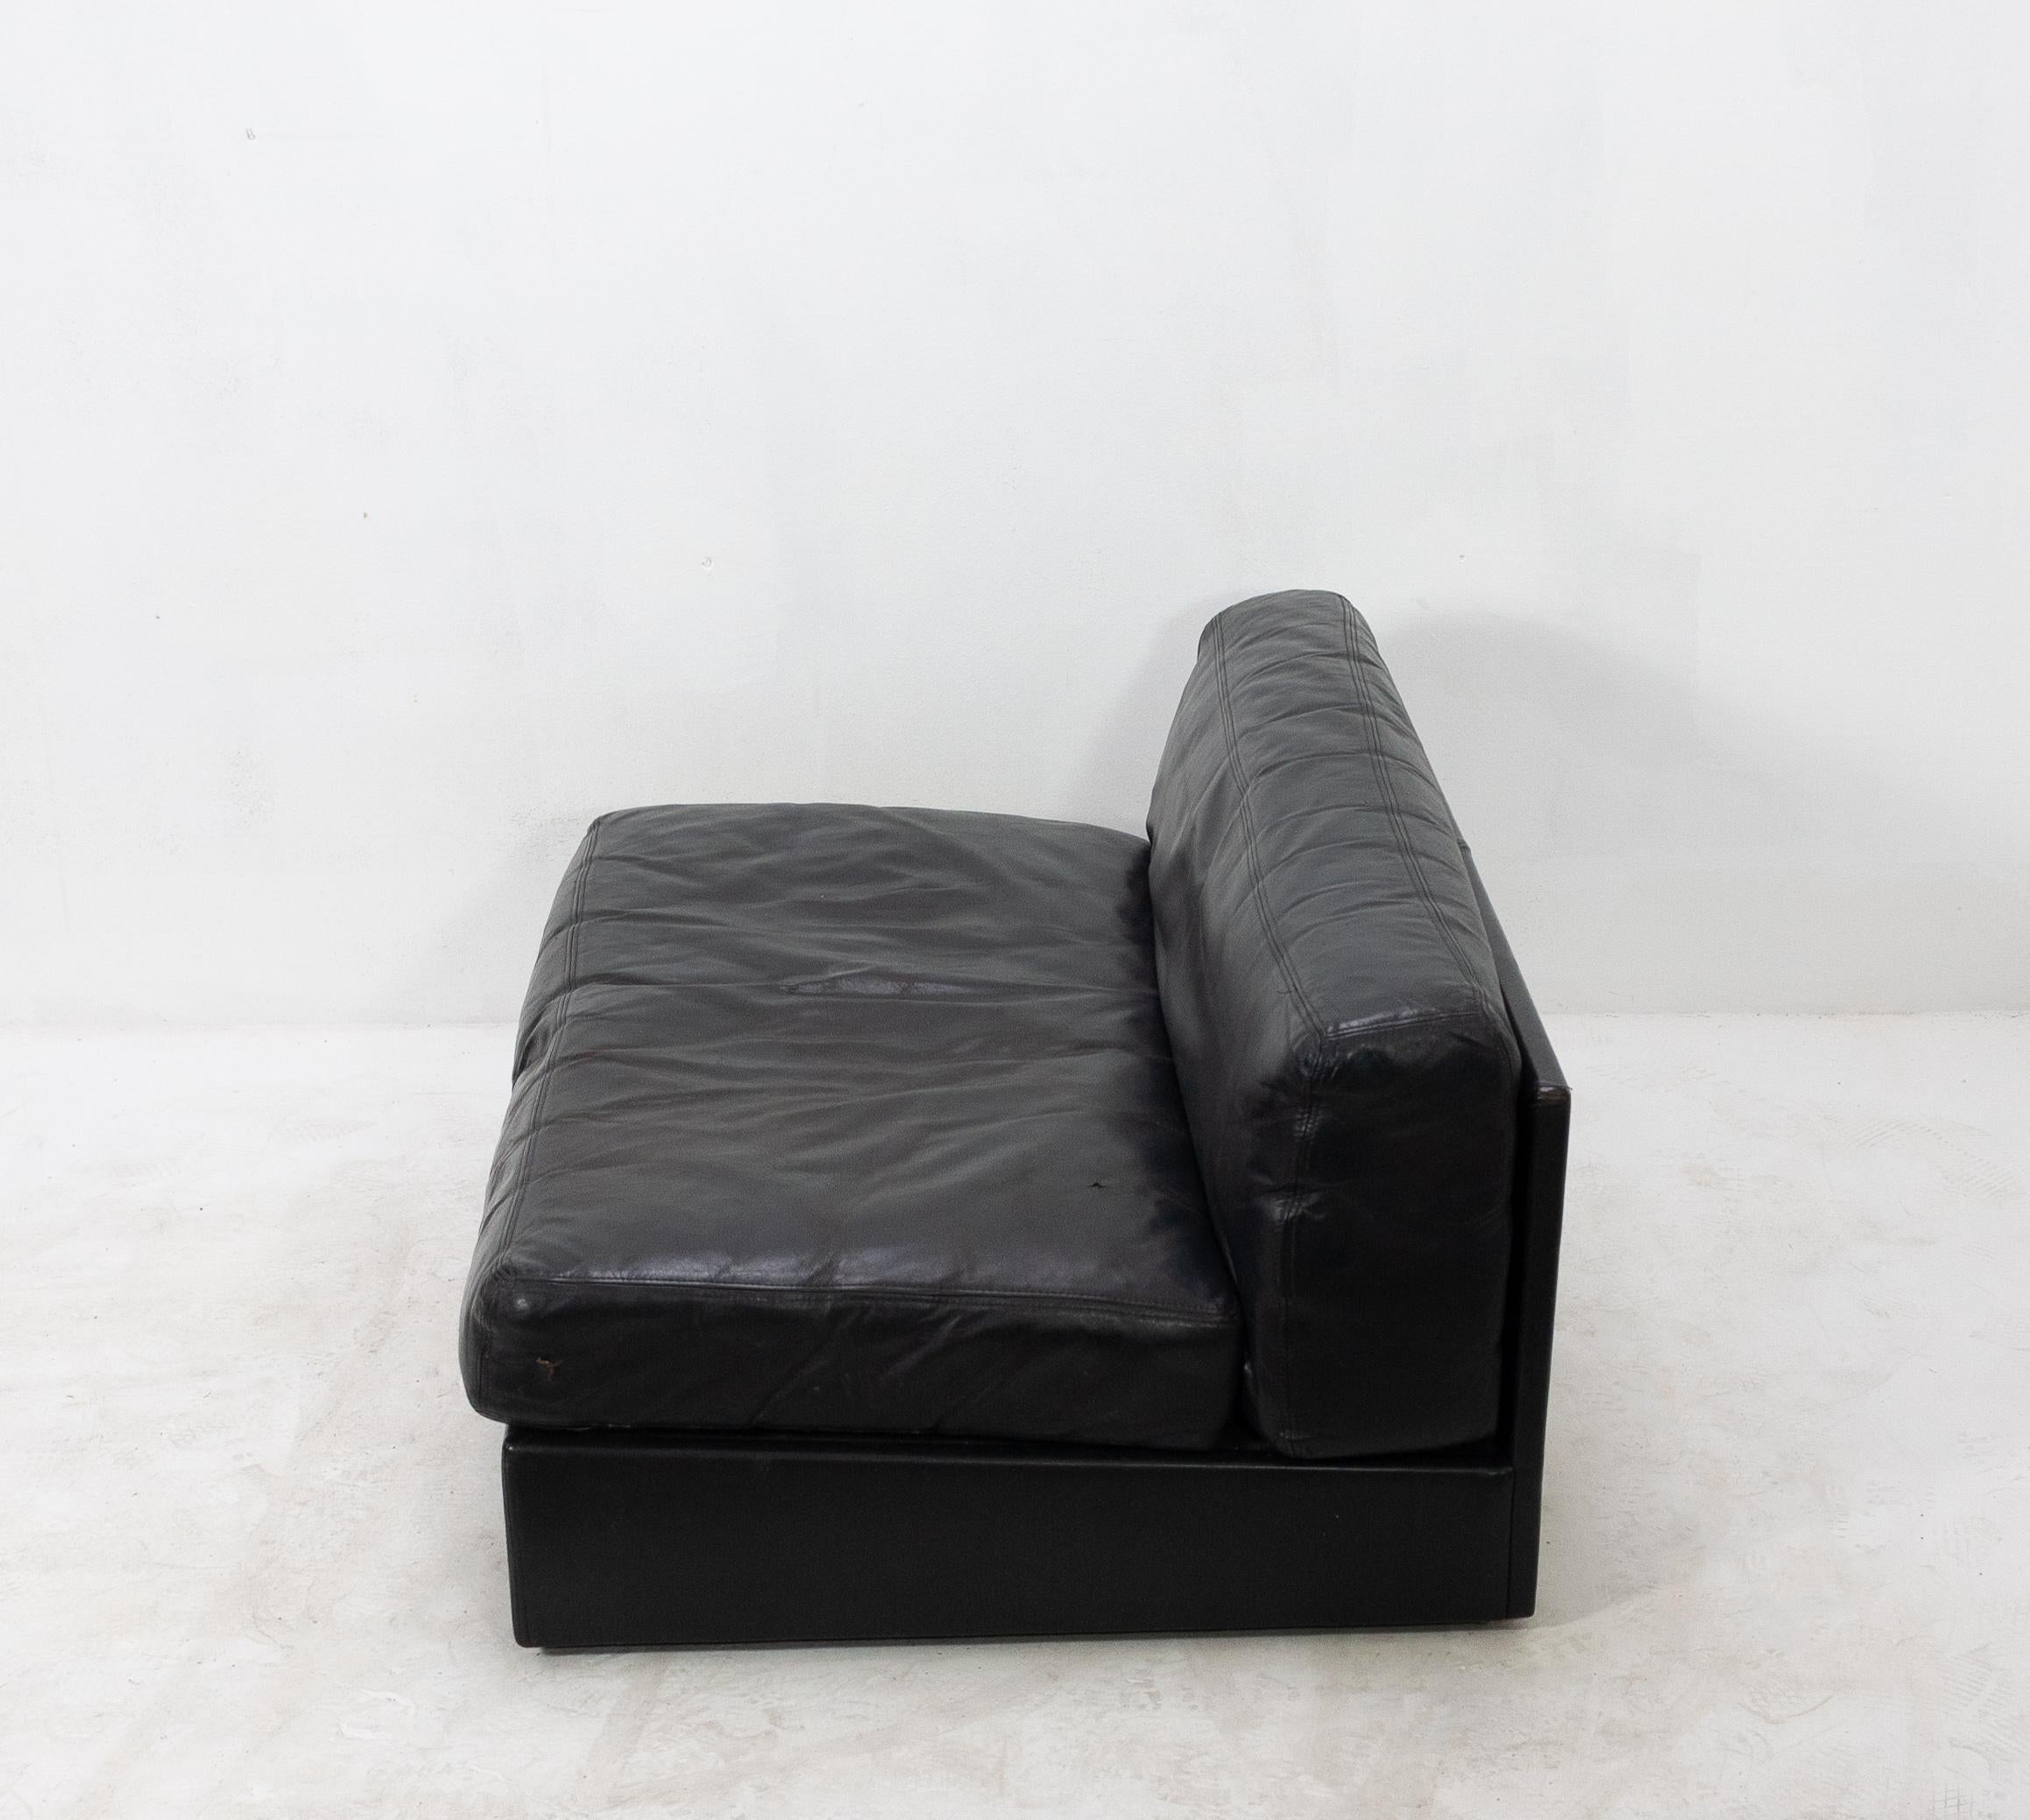 Handsomely distressed low-slung black leather sofa or loveseat from the 1960s. In the style of De Sede and featuring very nice quality materials.